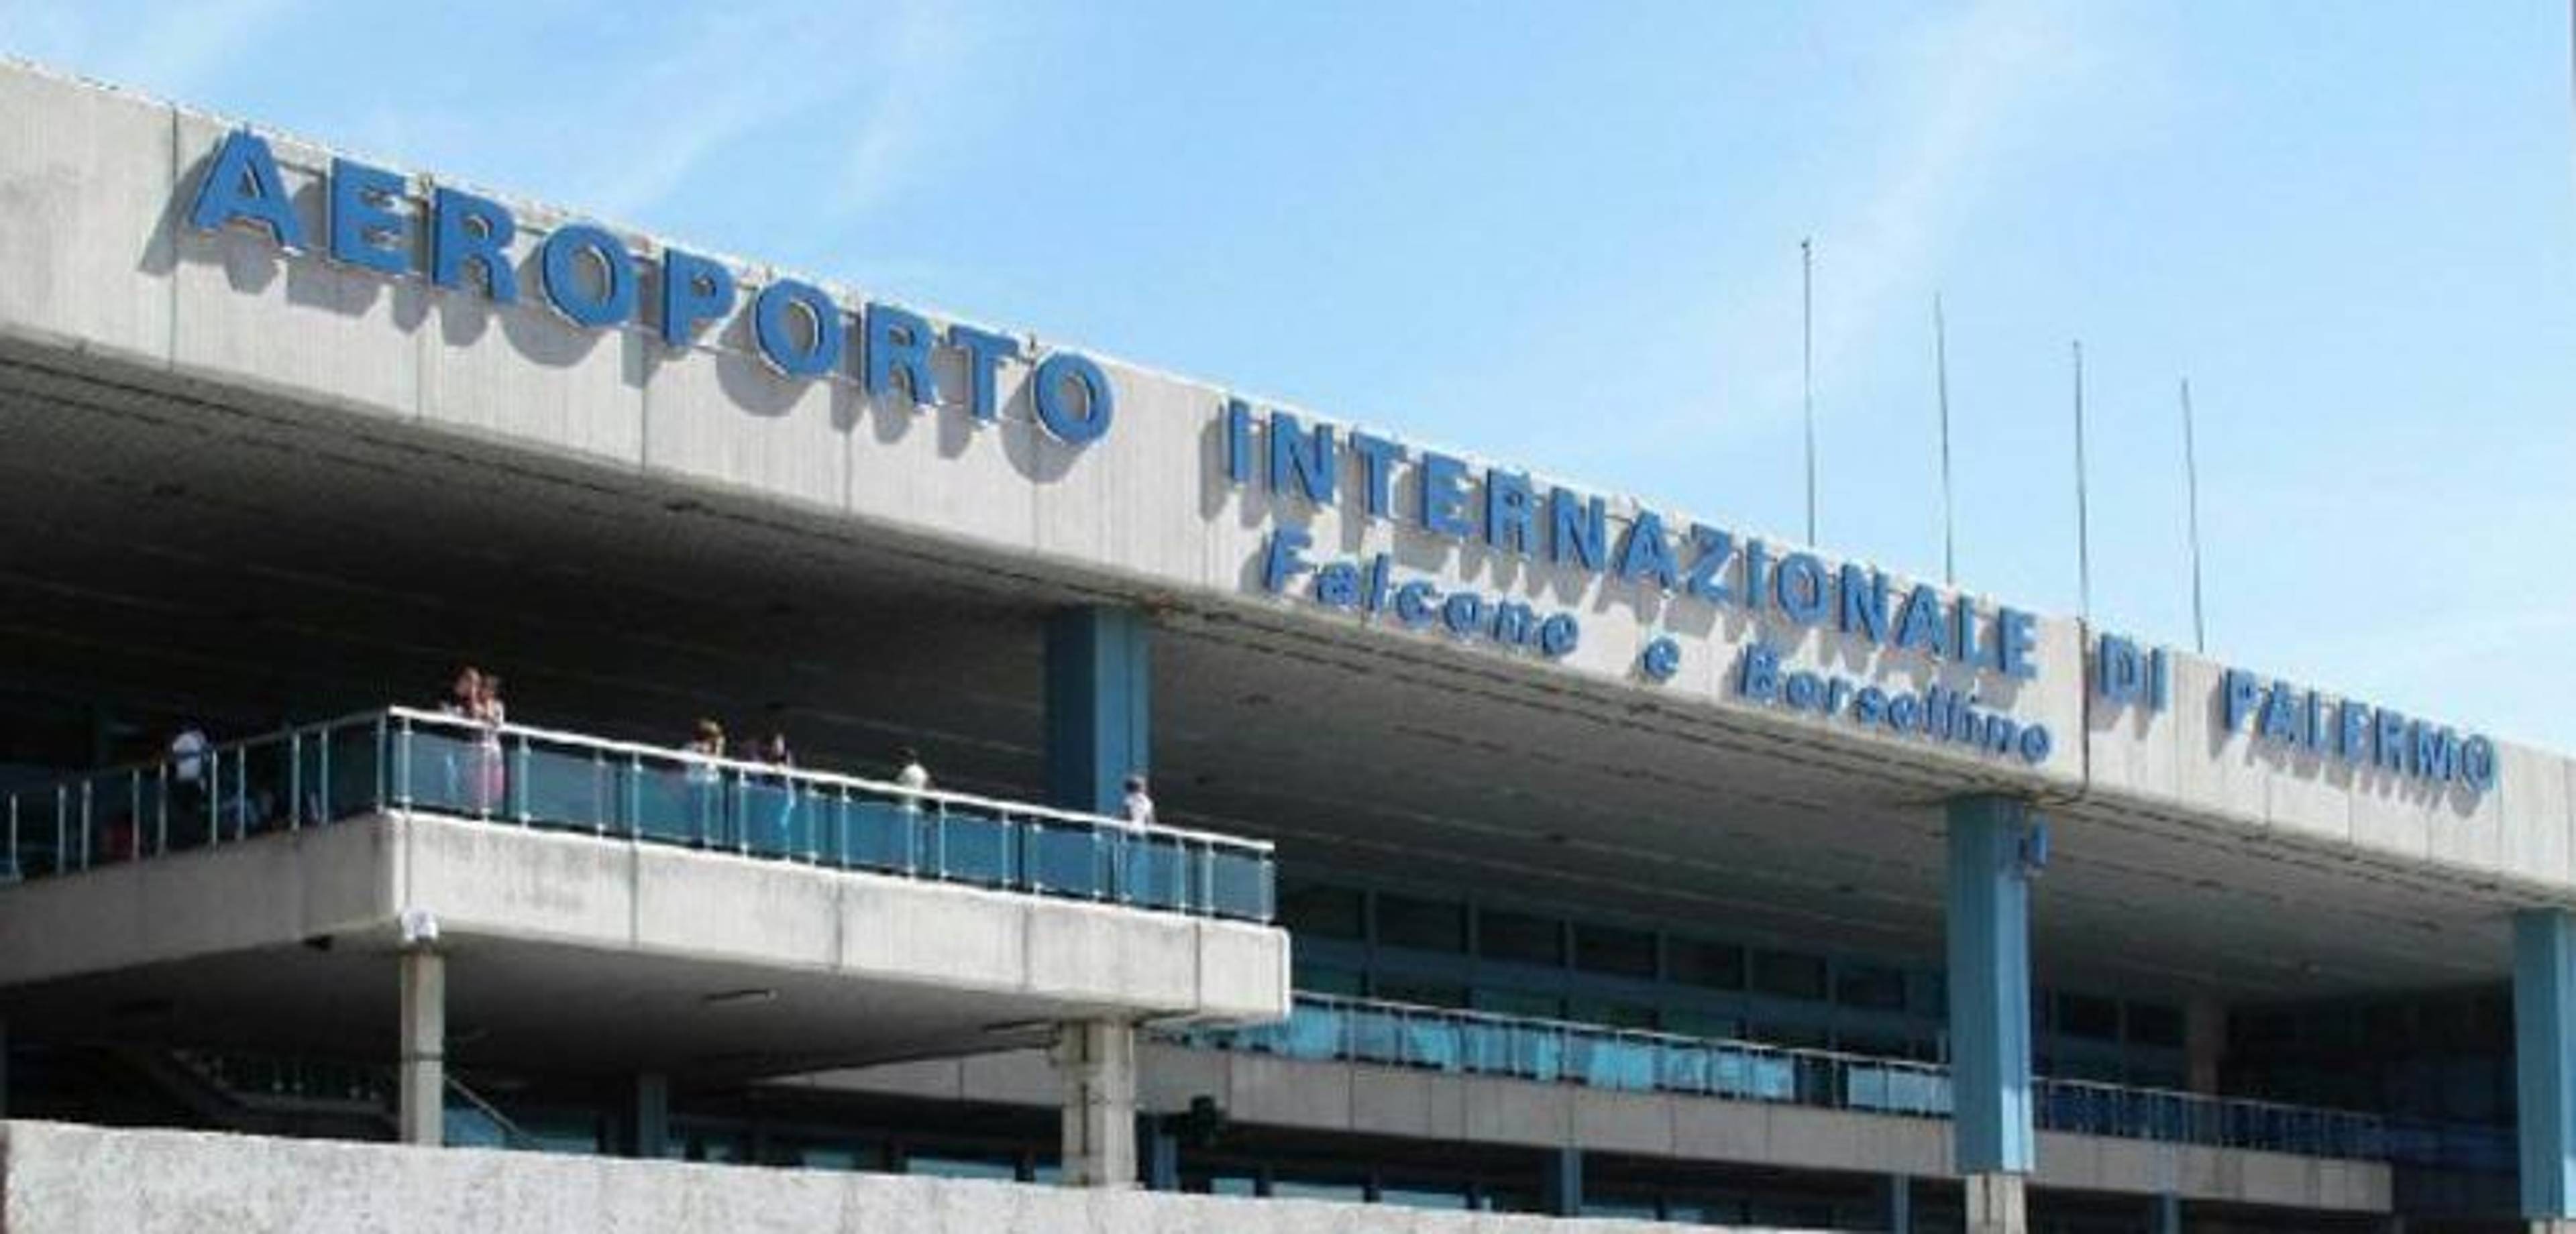 Airport of Palermo